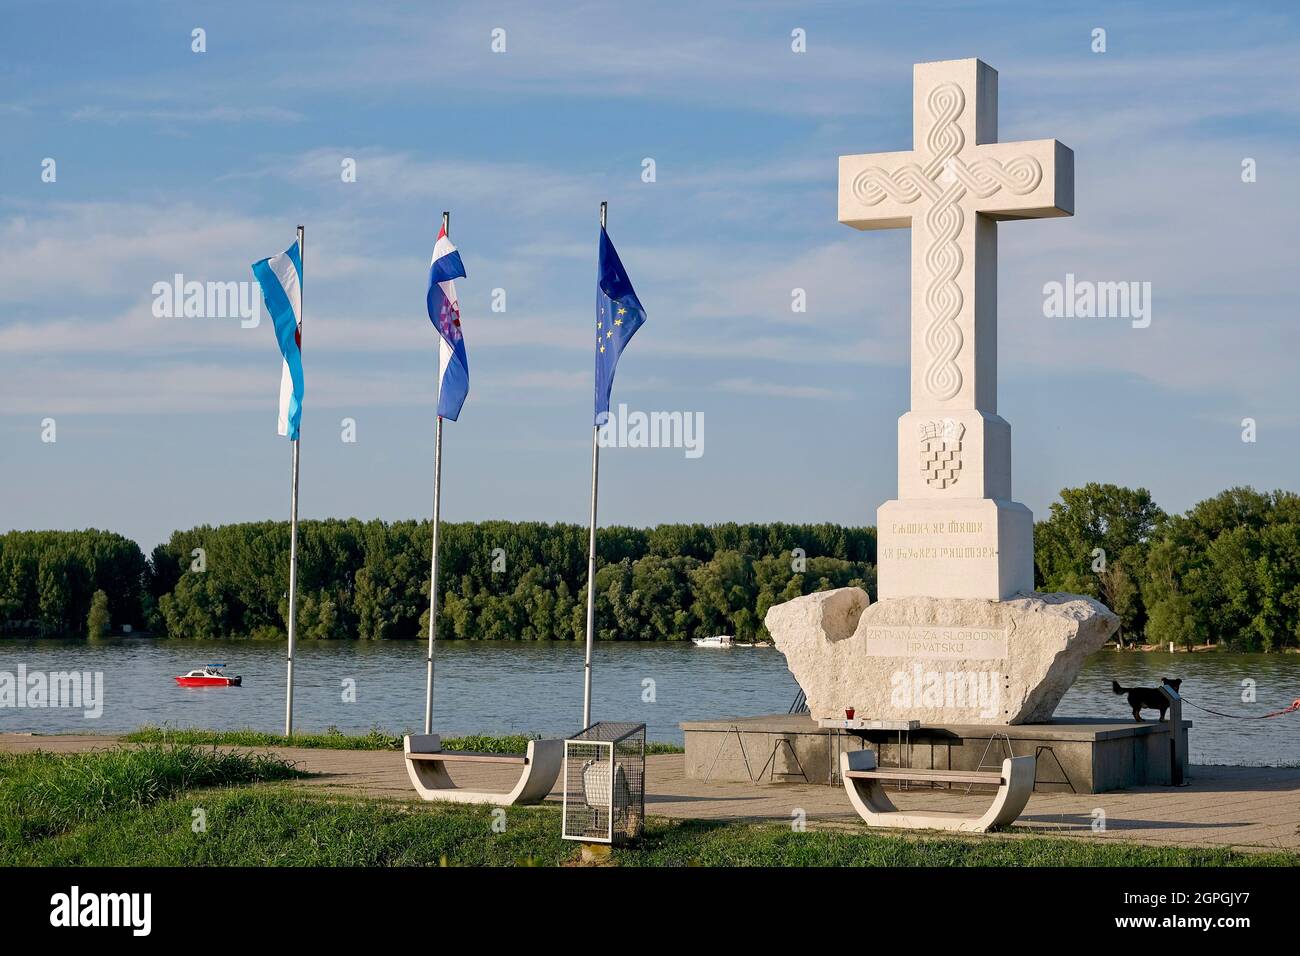 Croatia, Slavonia, Vukovar, memorial of the mouth of the Vuka and the Danube, cross in honor of all those who gave their lives for free and independent Croatia Stock Photo